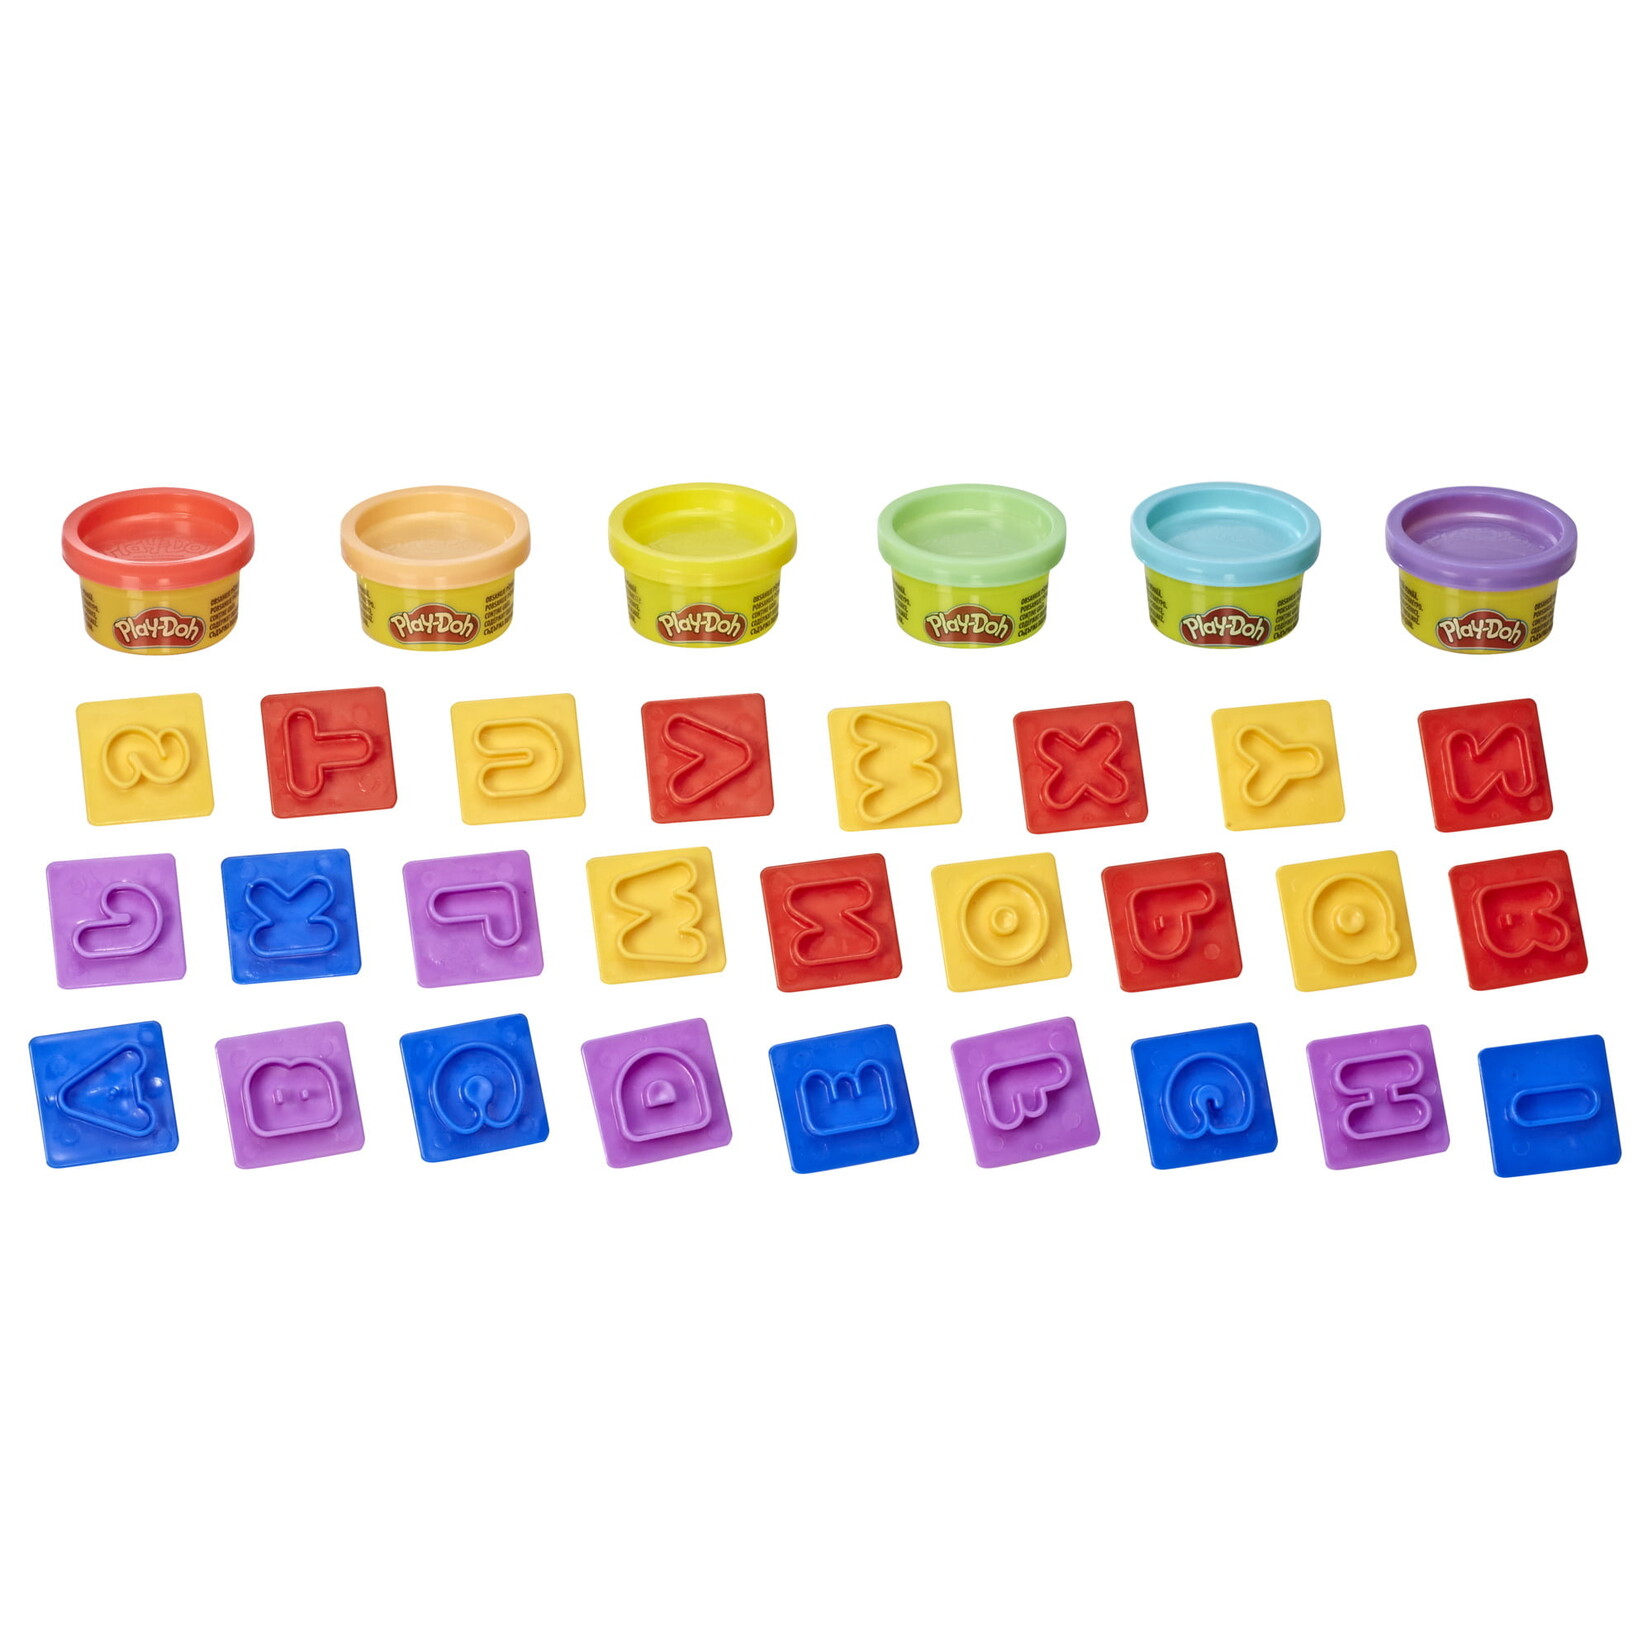 Hasbro Fundamentals Letter Stamper Set with 6, 1-Ounce Cans